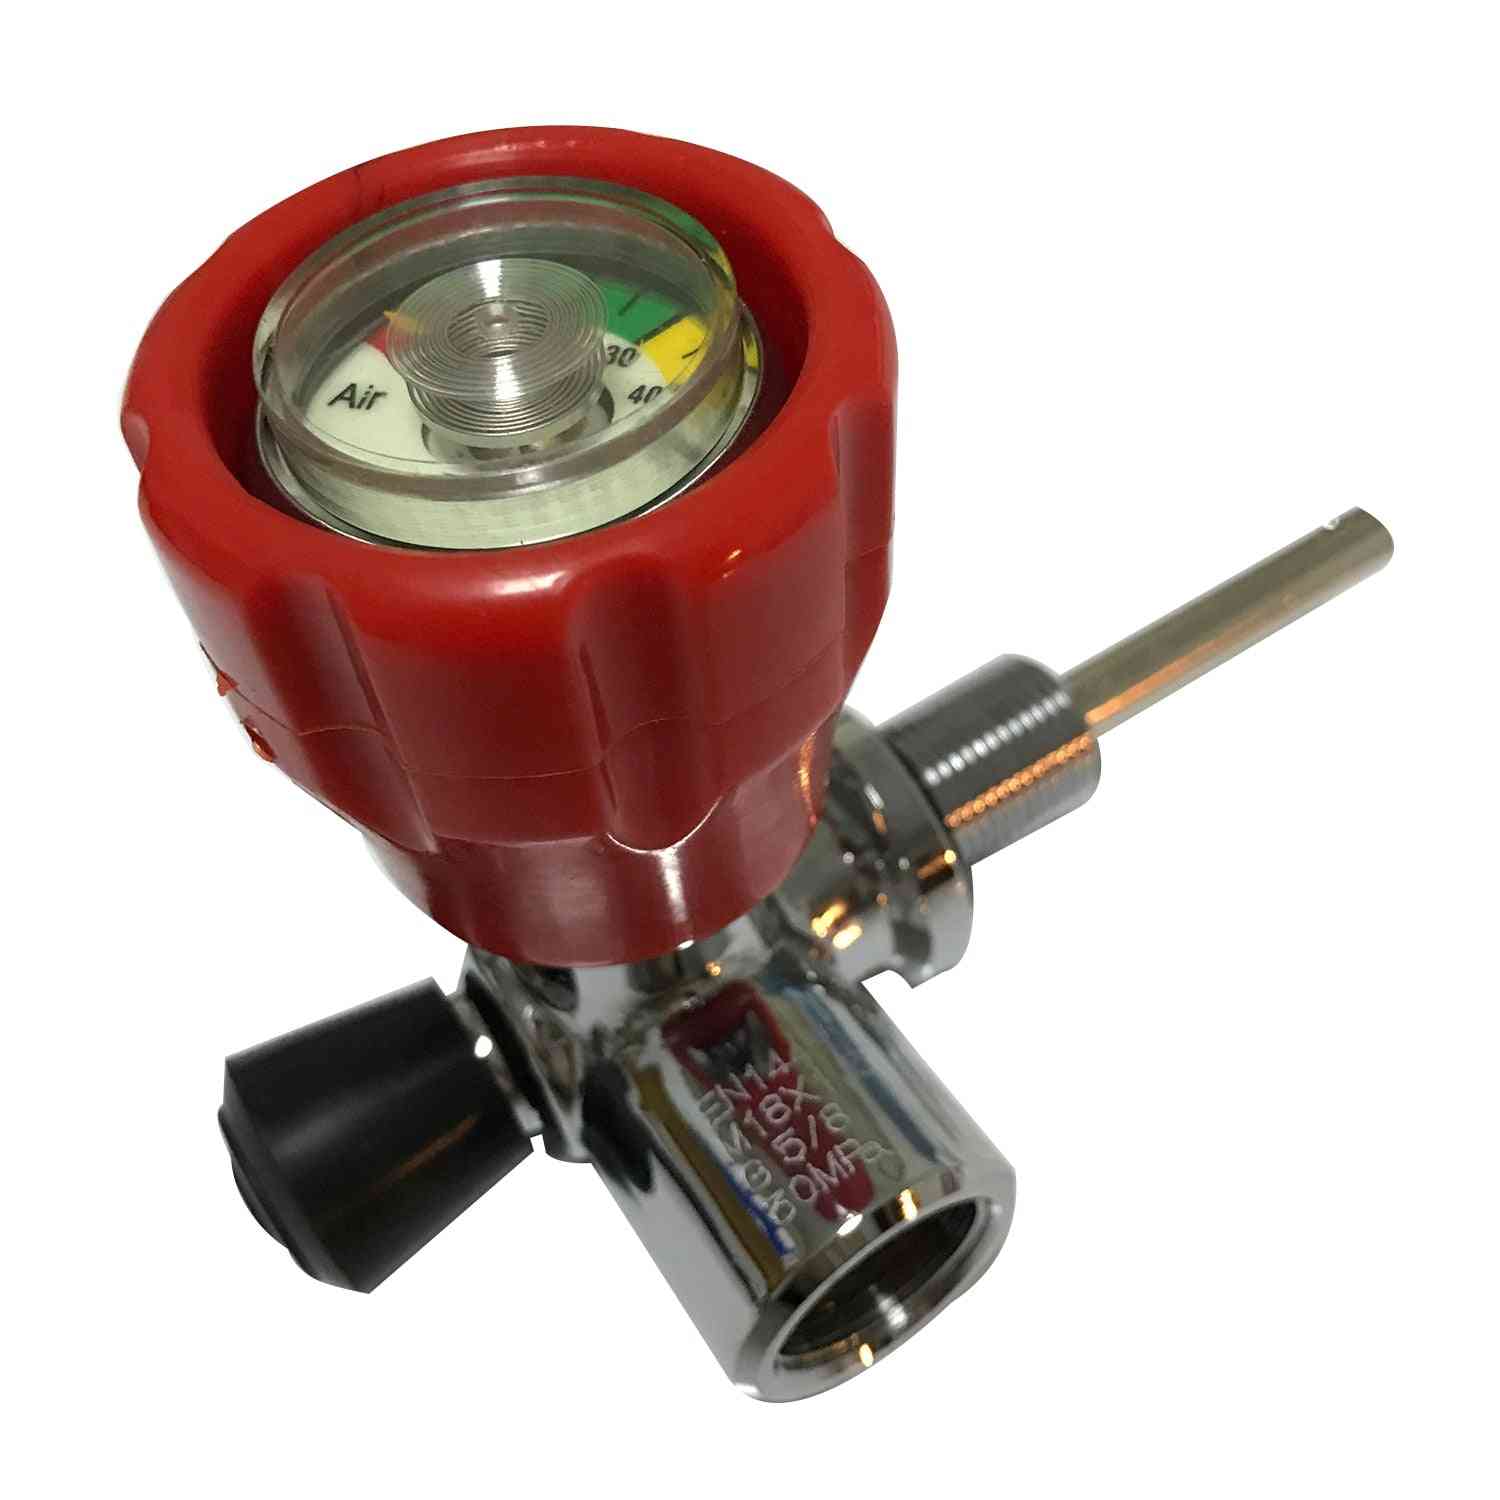 G5/8- Thread Output For Airforce Condor, Scuba Diving High Pressure, Cylinder Gas Station Valve